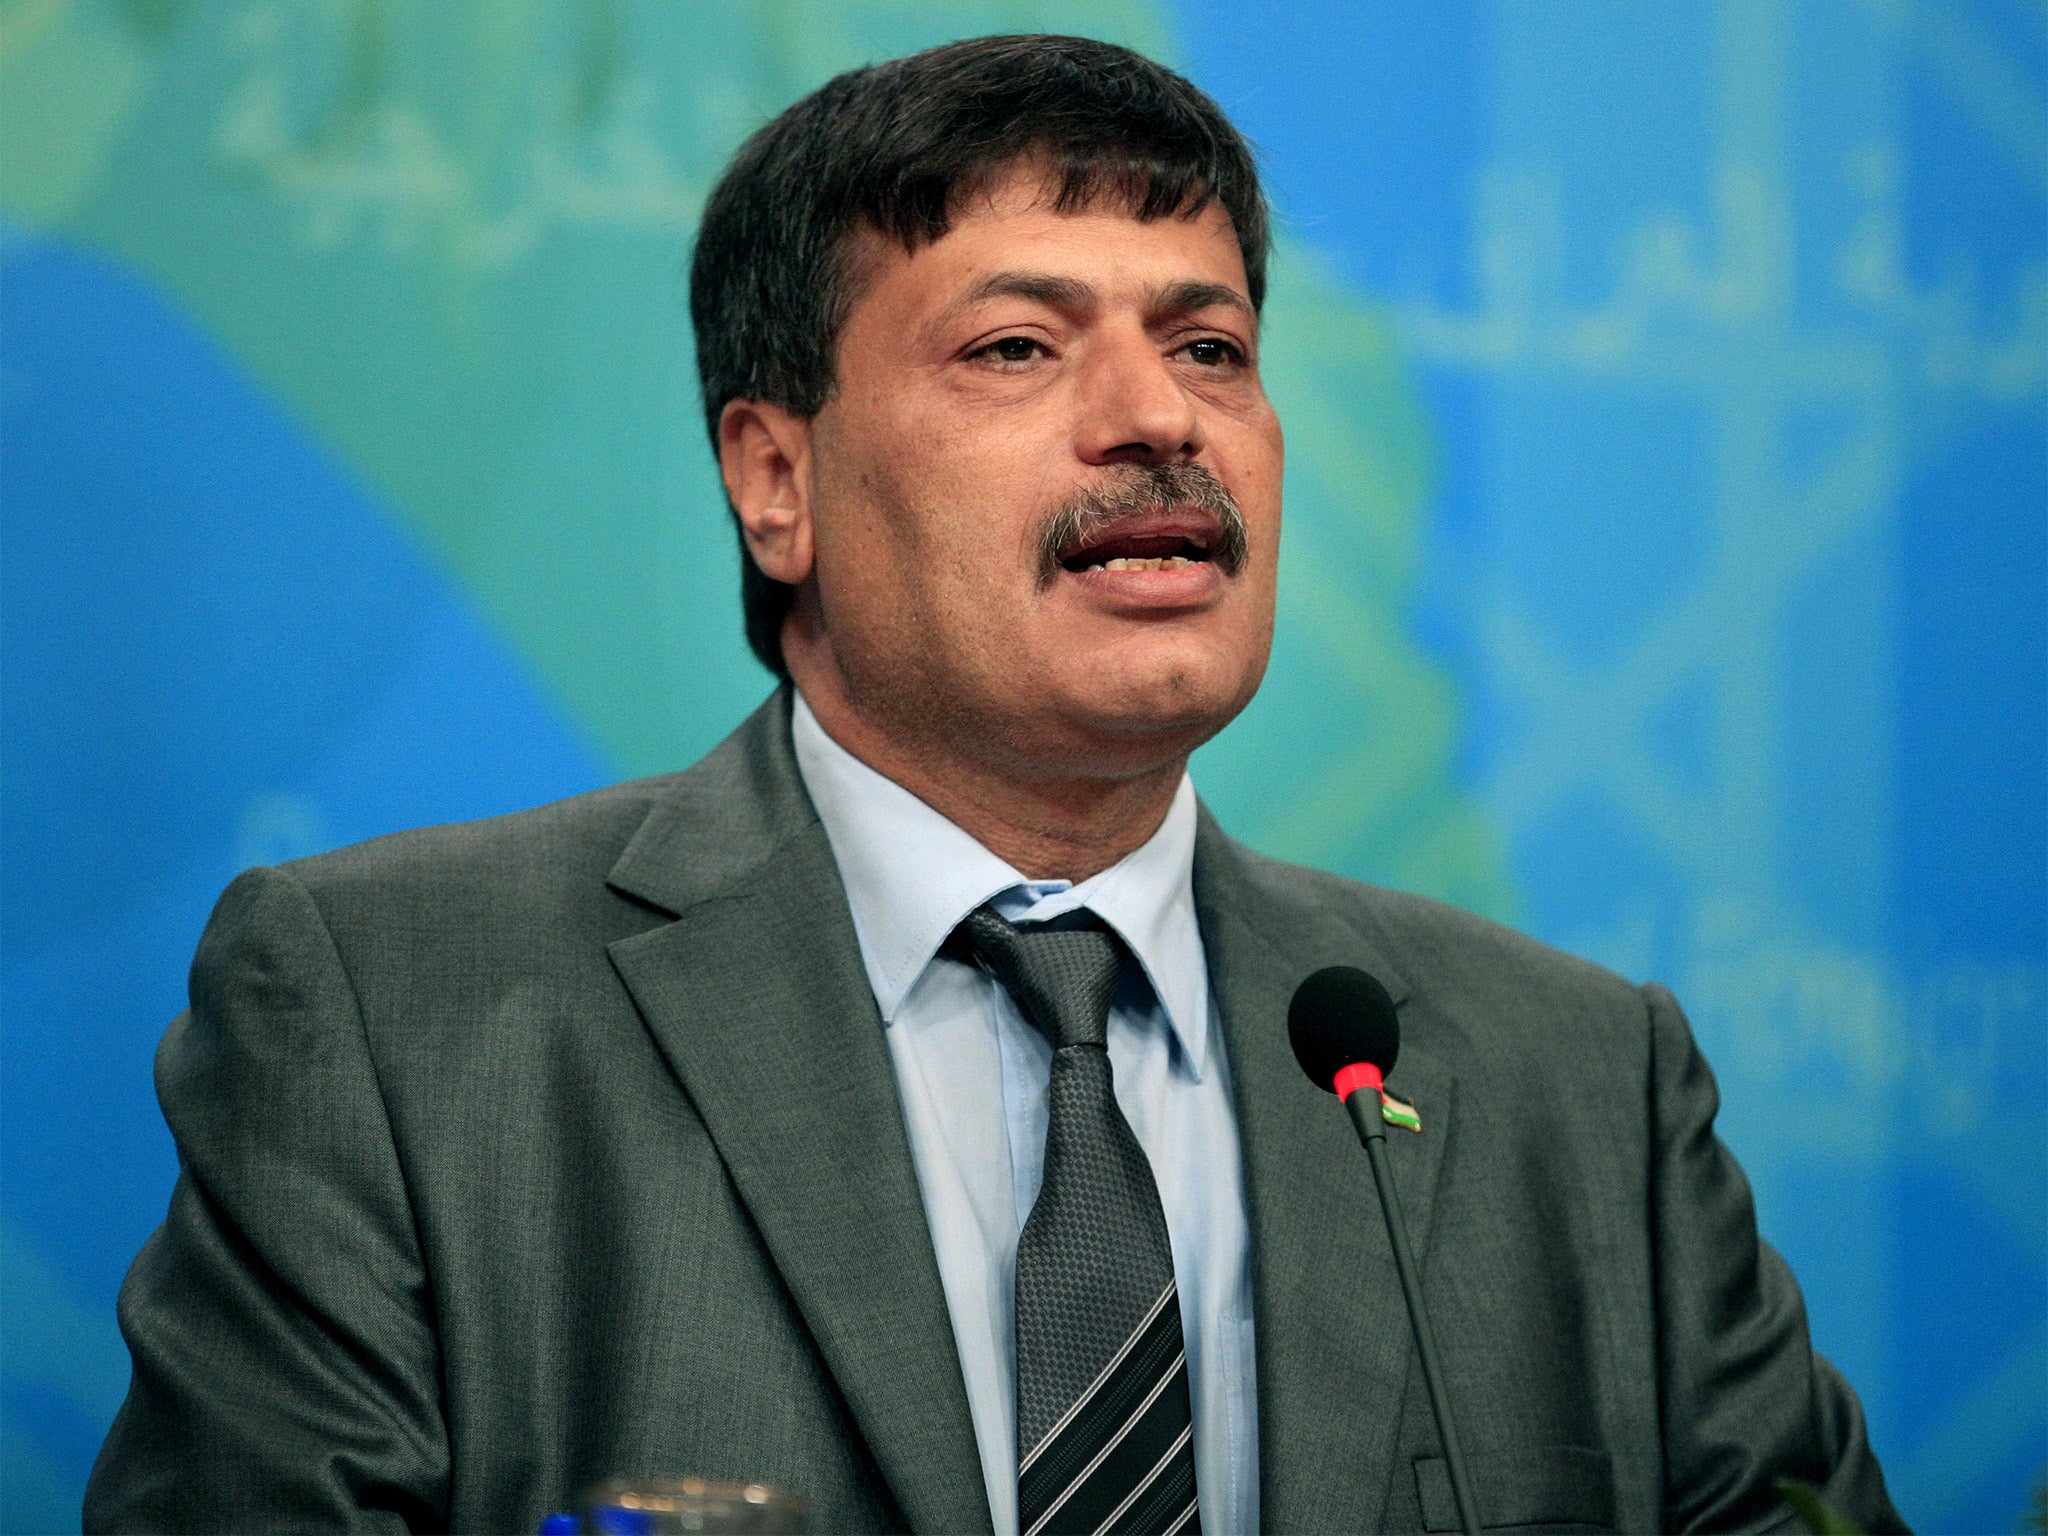 Ziad Abu Ein, pictured speaking at a news conference in 2012